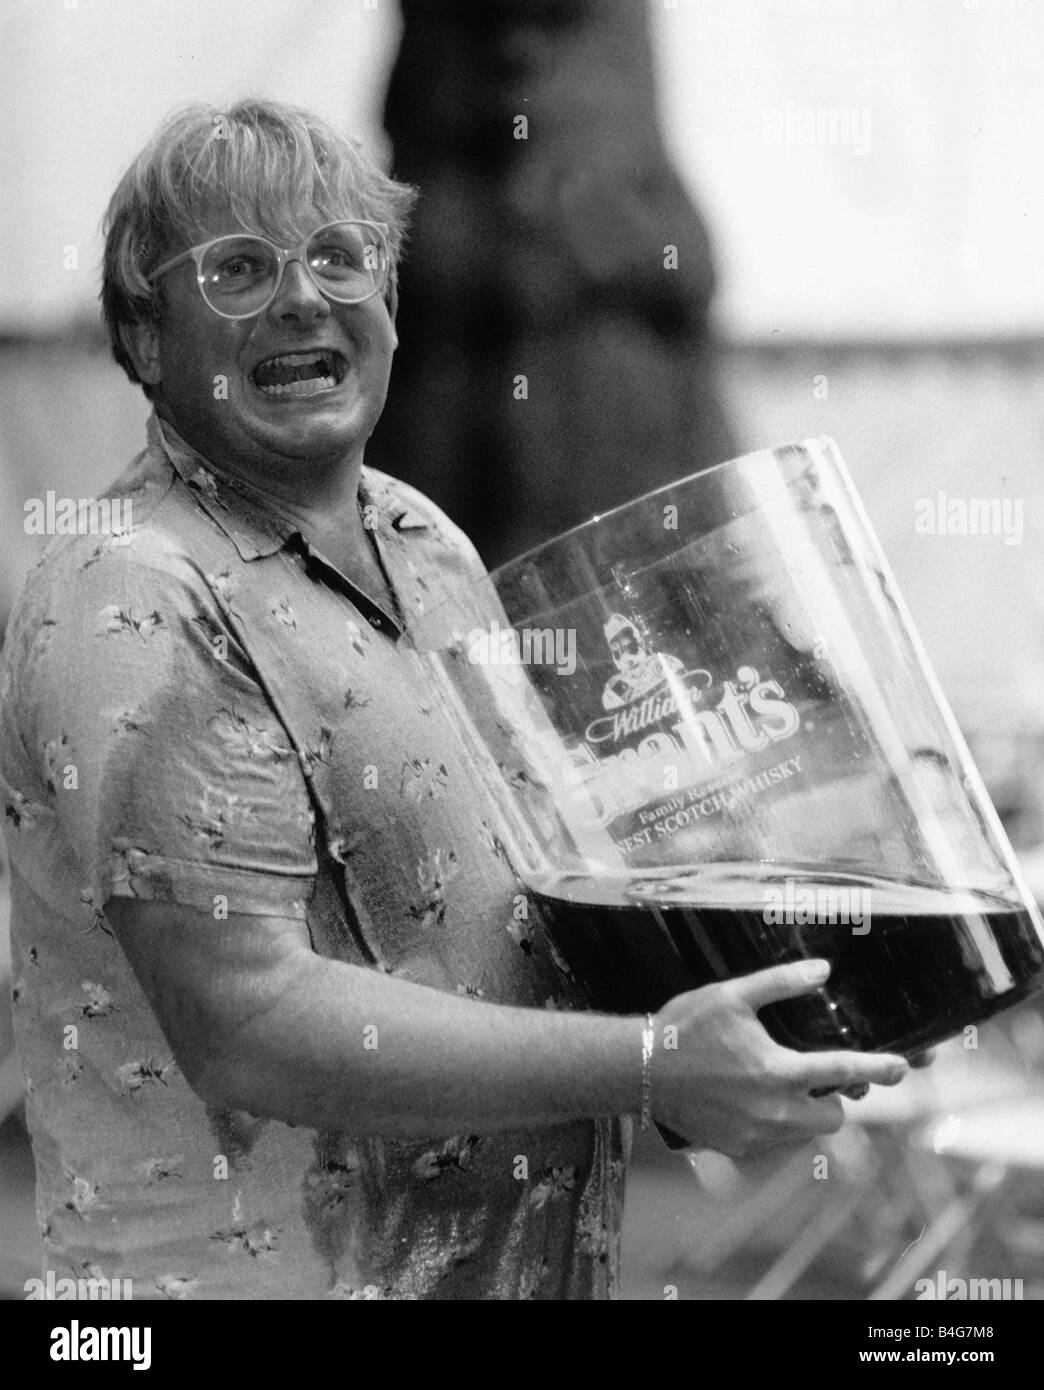 Christopher Biggins with giant glass of Grants Whisky 1989 Stock Photo -  Alamy